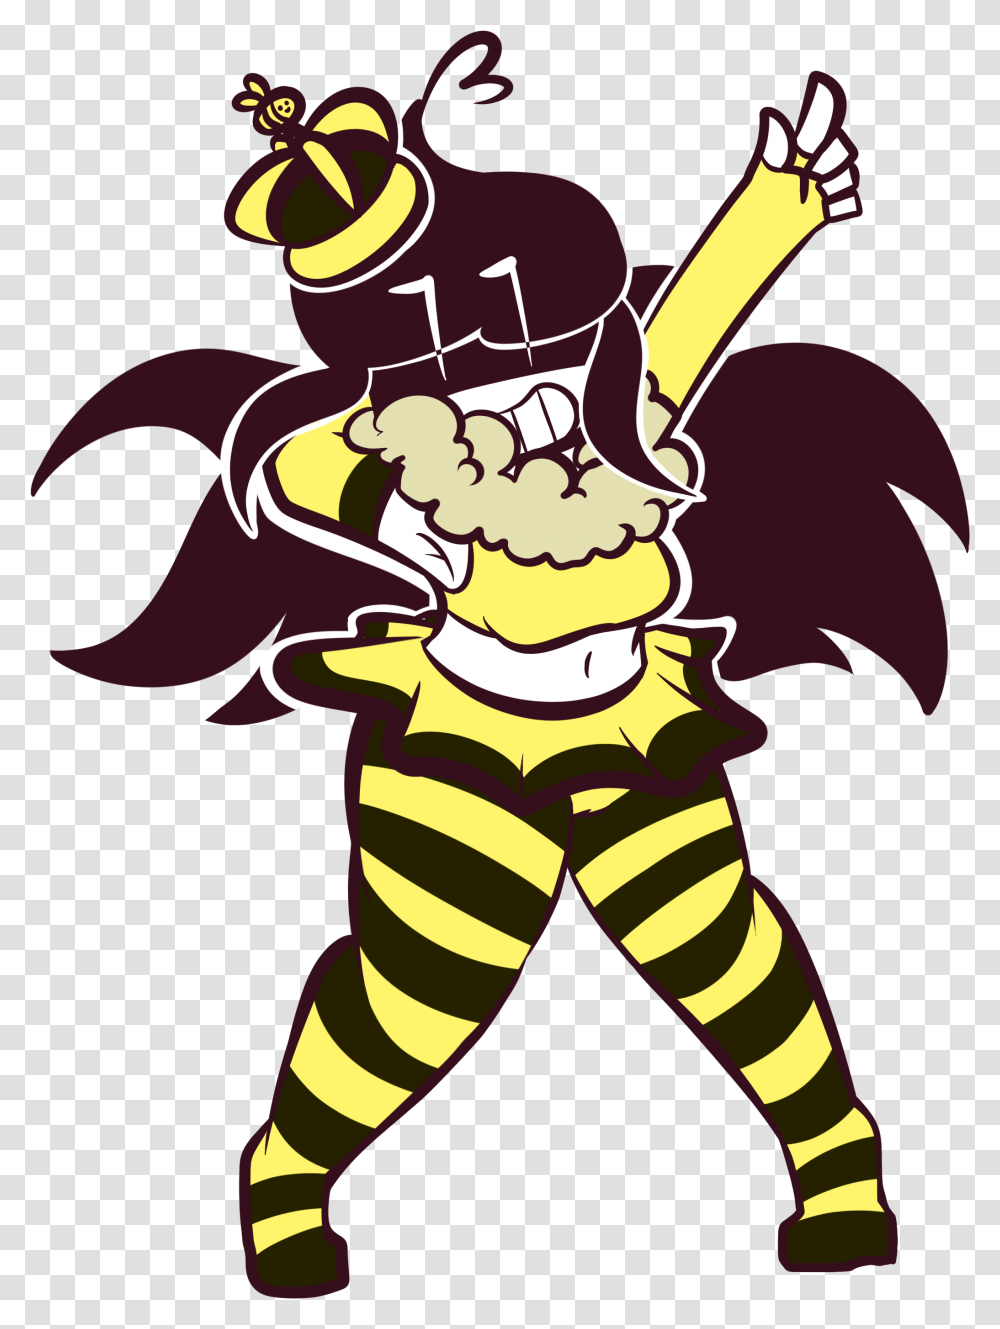 Download Queen Bee Jay Cartoon Full Size Image Pngkit Fan Art Queen Bee Terraria, Person, Human, Performer, Pirate Transparent Png